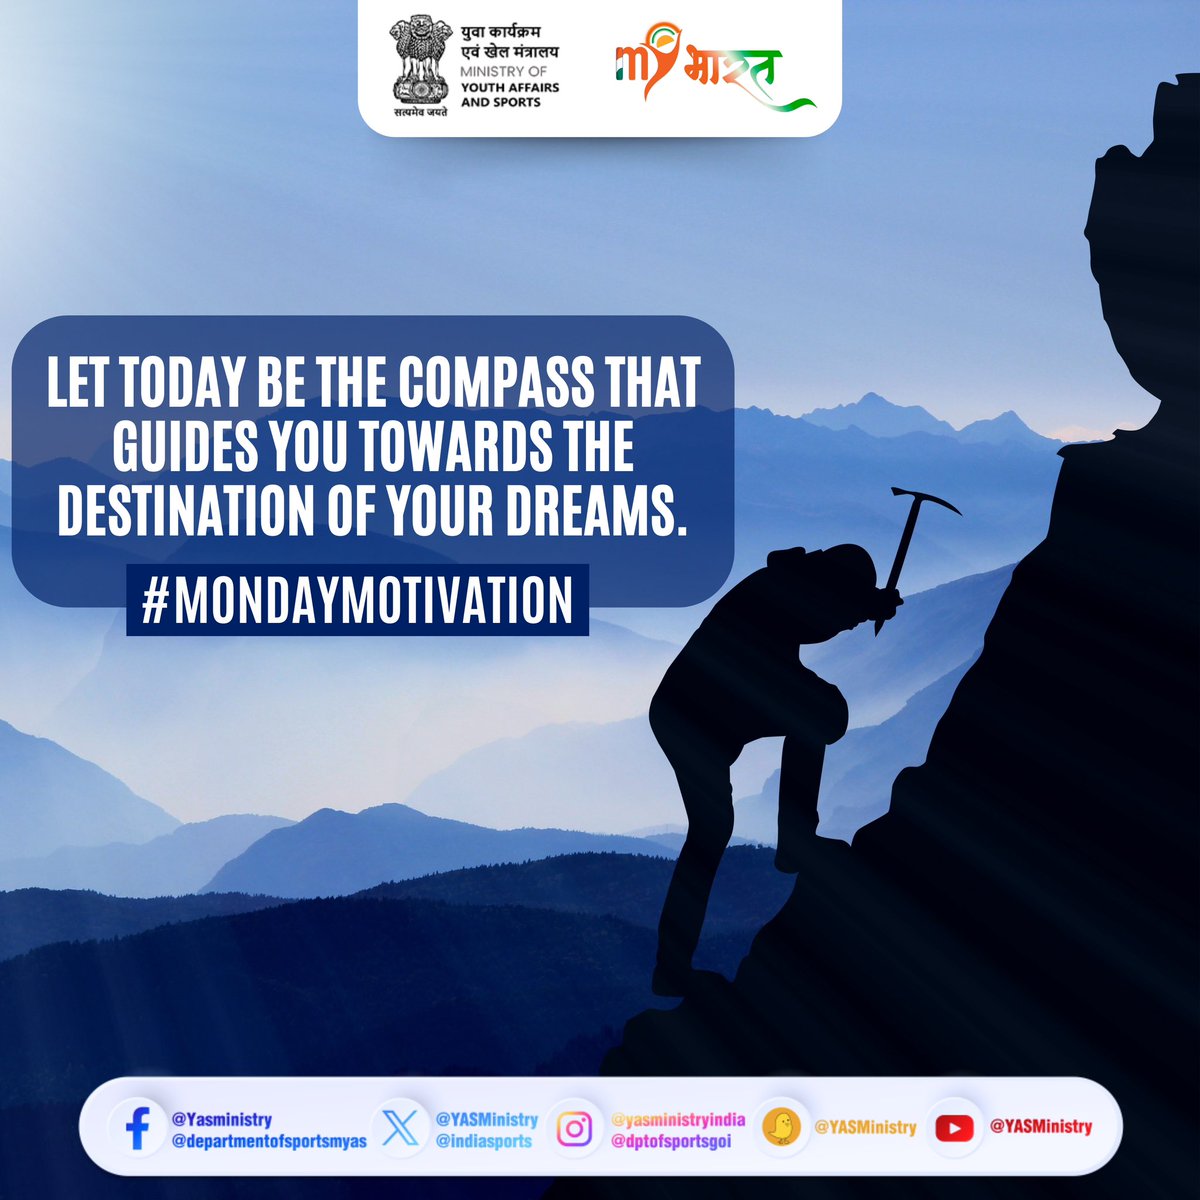 Hold onto the power of today as your guiding compass, steering you towards the destination of your dreams. Let every step you take be the light of the path to your aspirations! #MondayMotivation